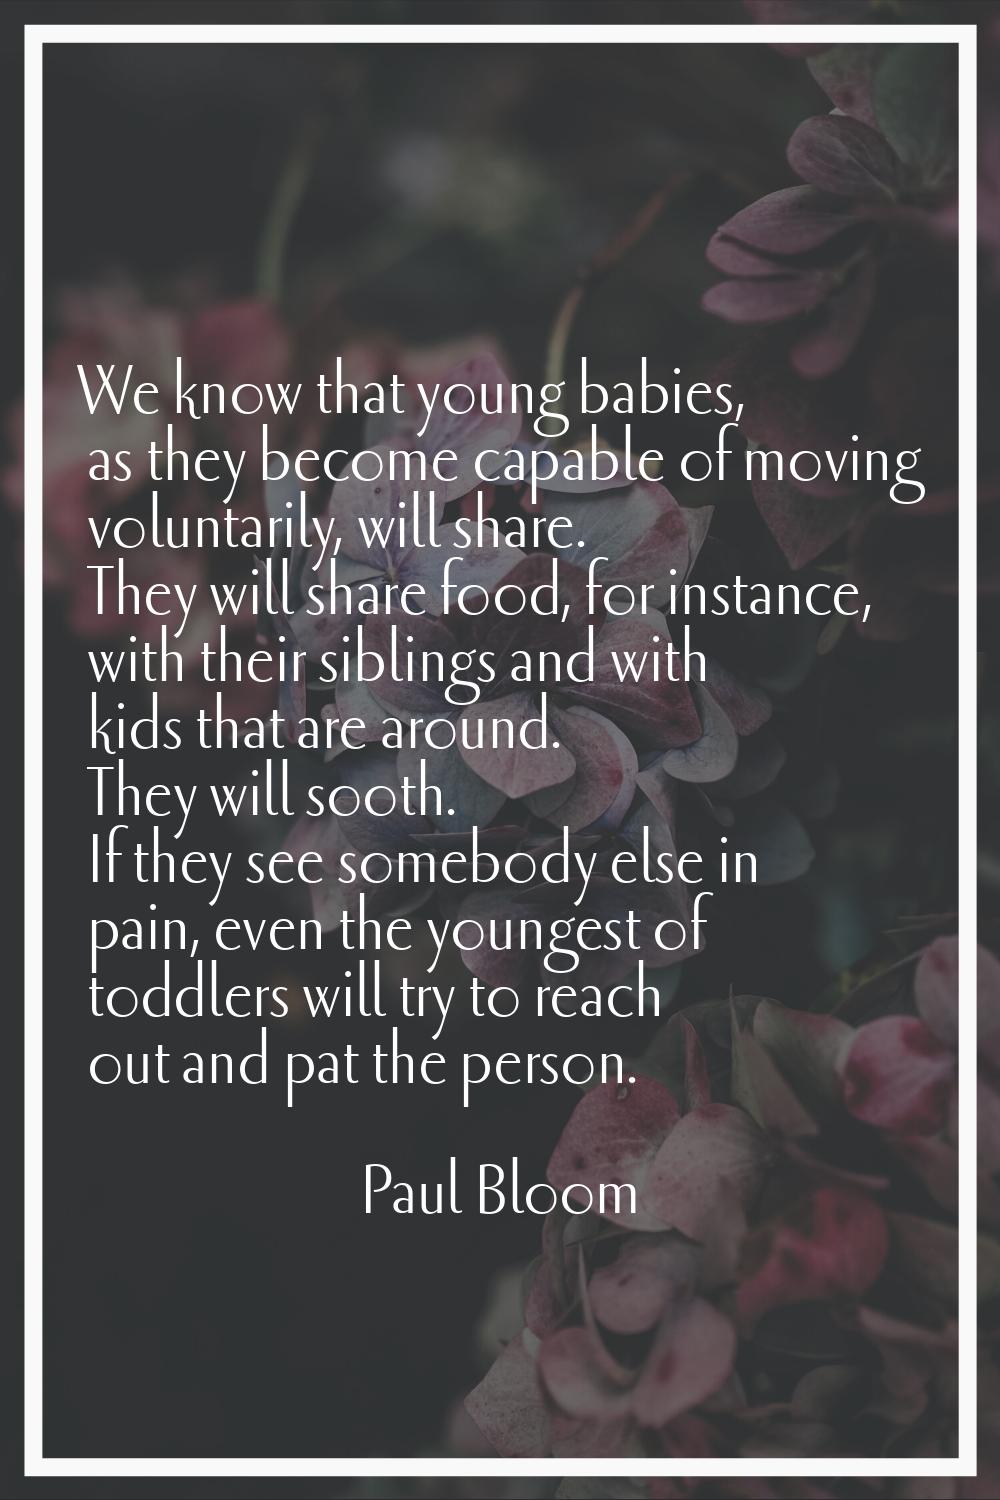 We know that young babies, as they become capable of moving voluntarily, will share. They will shar